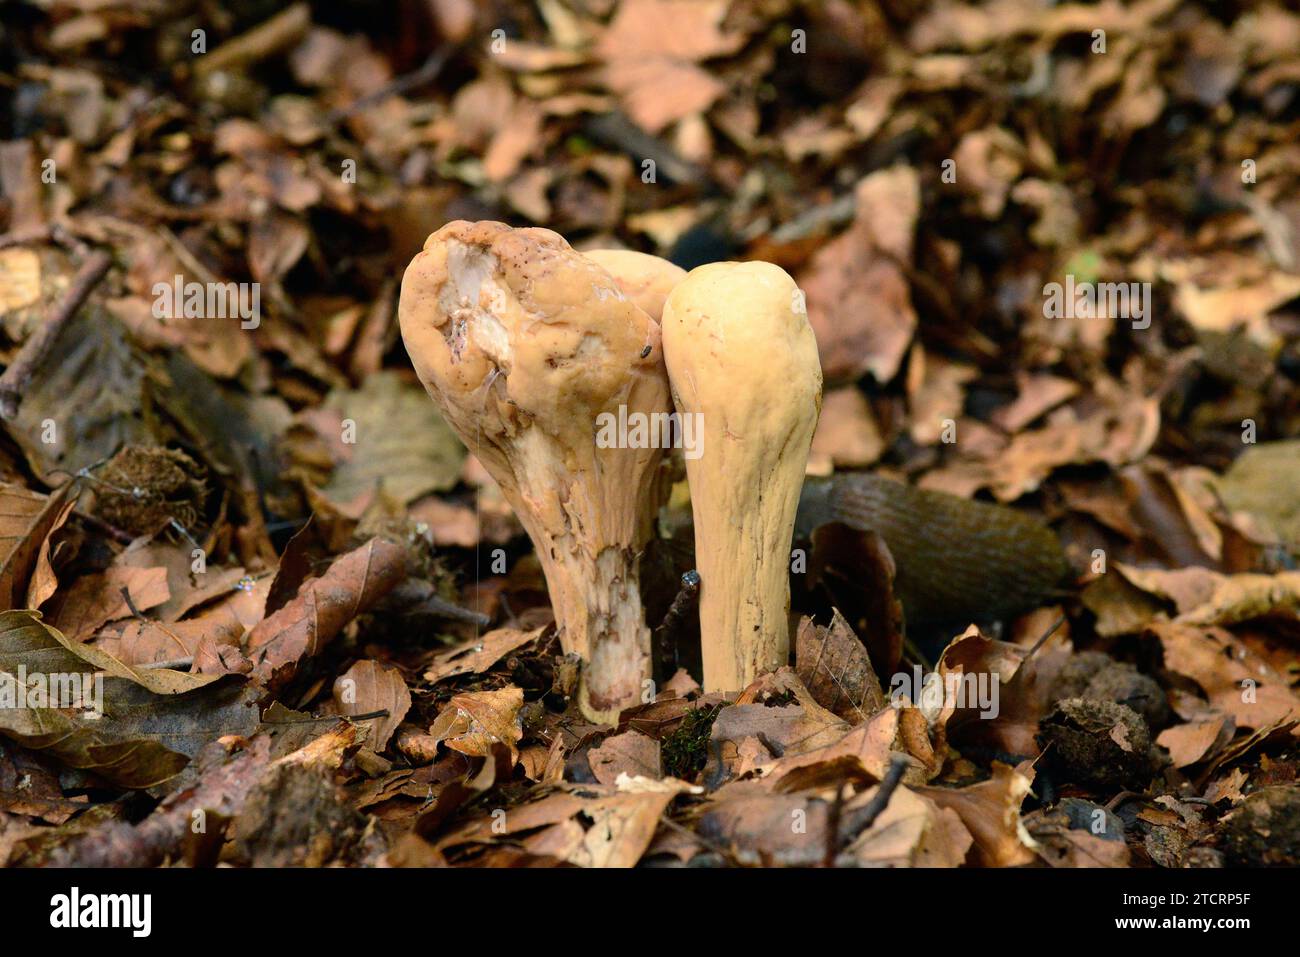 Largedubted clavaria (Clavariadelphus pistillaris) is a mushroom that grows in beech forest. This photo was taken in Montseny Biosphere Reserve, Barce Stock Photo